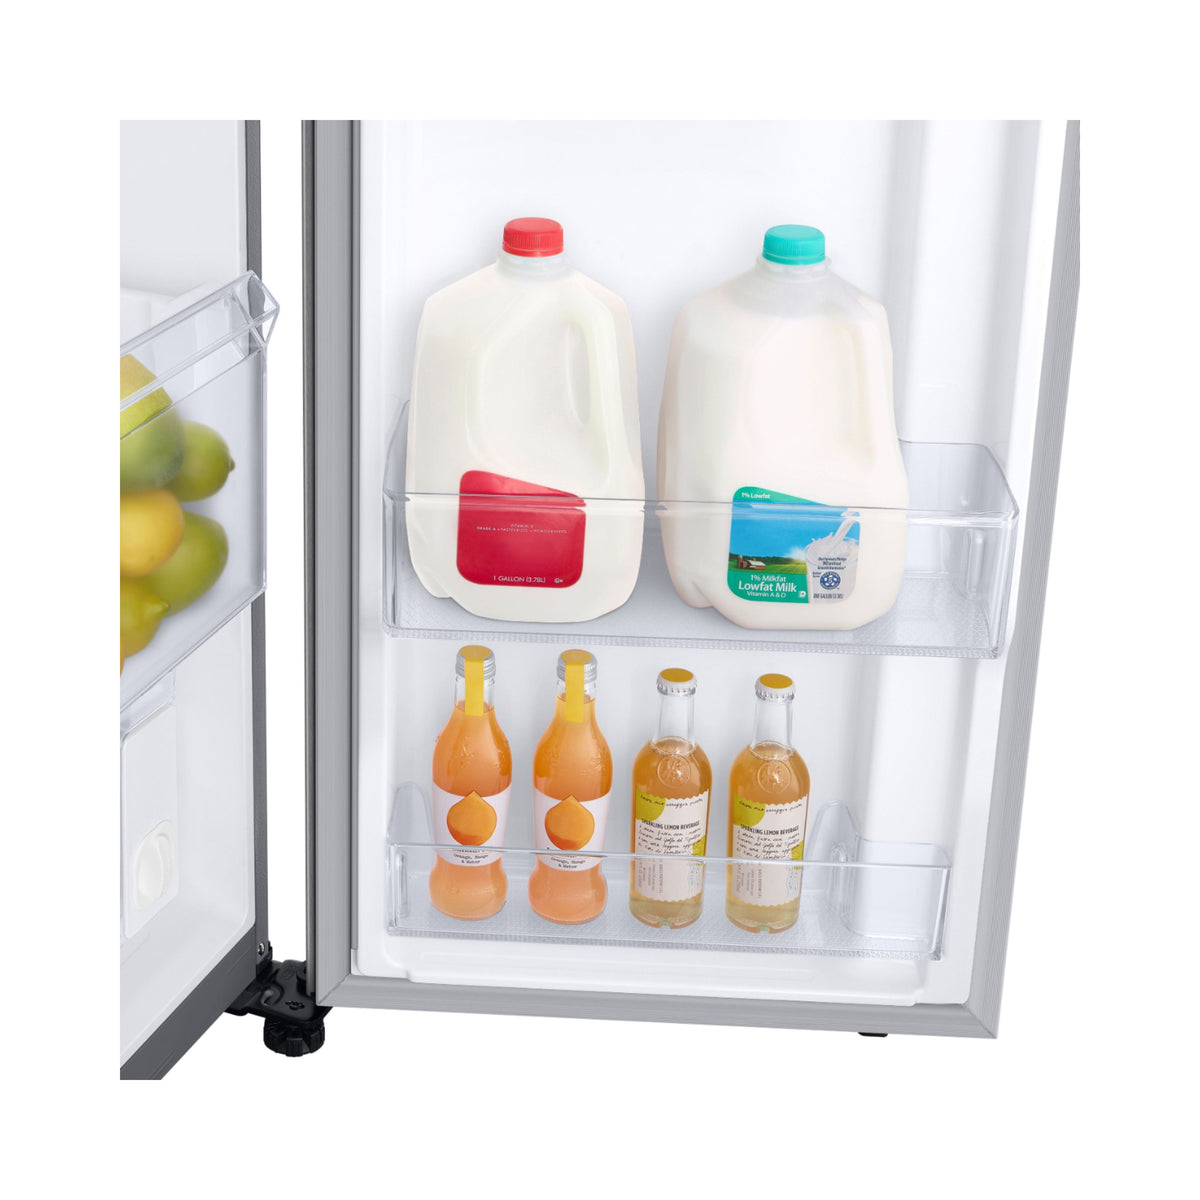 SAMSUNG RS23A500ASR/AA 23 cu. ft. Smart Counter Depth Side-by-Side Refrigerator